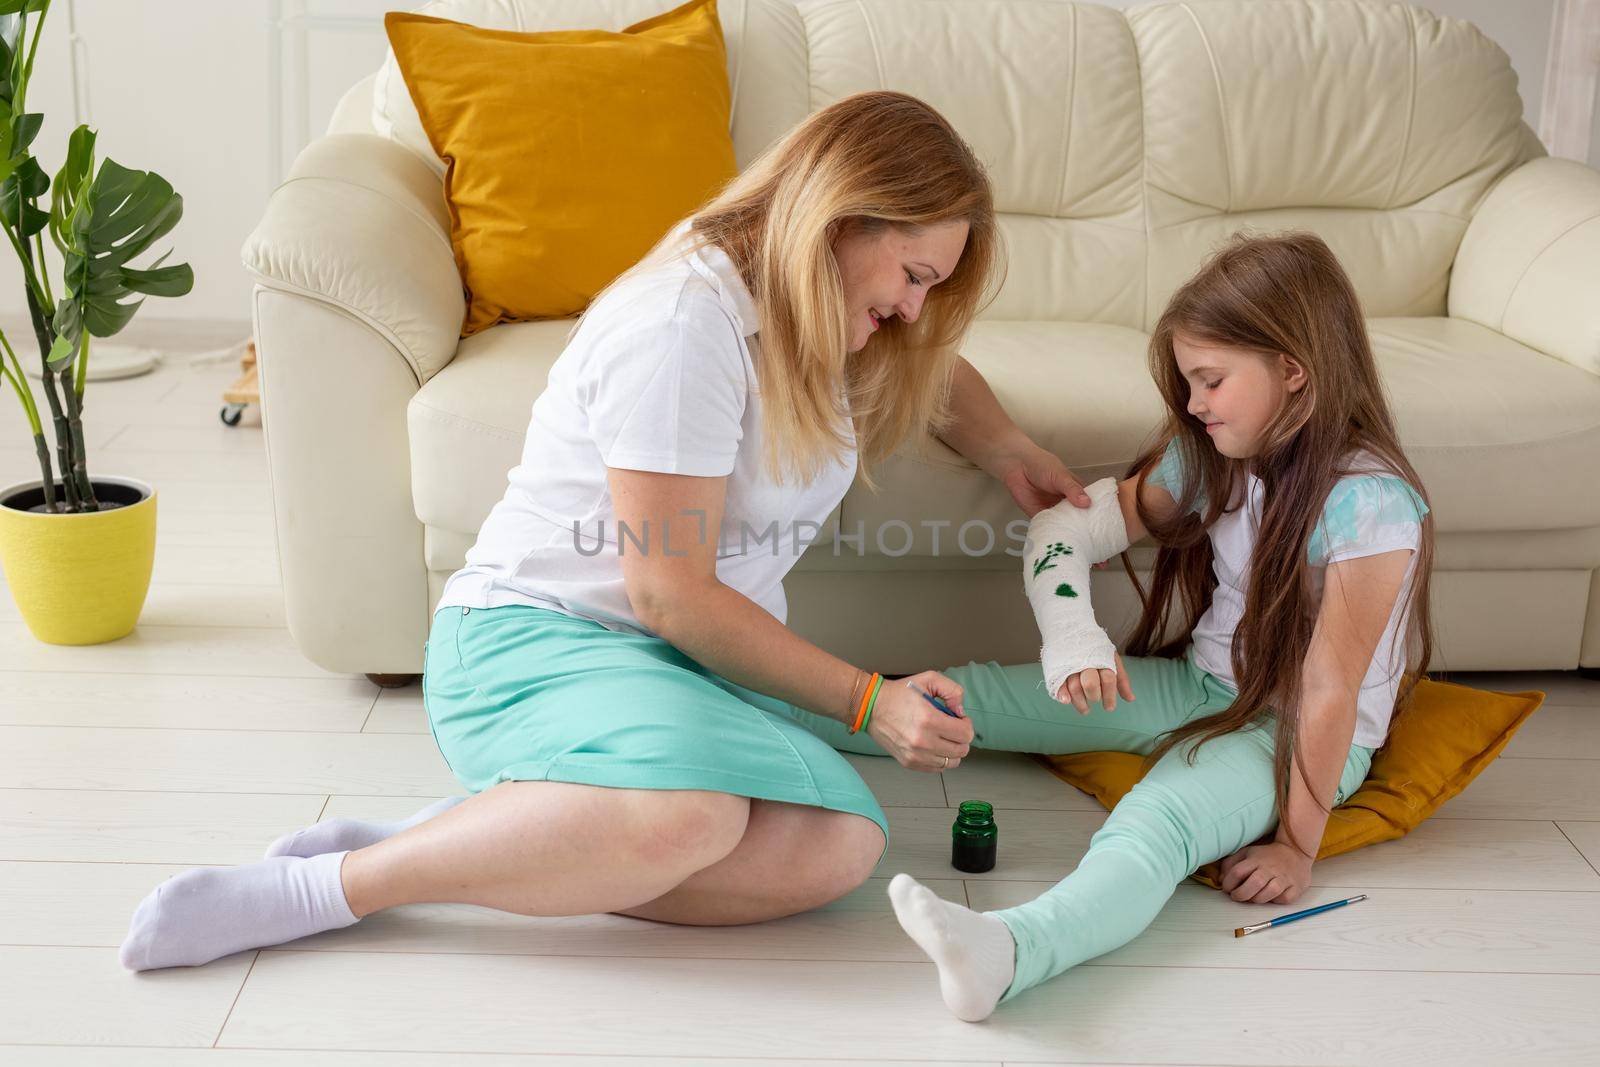 Mother and daughter drawing picture on bandage using paints. Play therapy concept